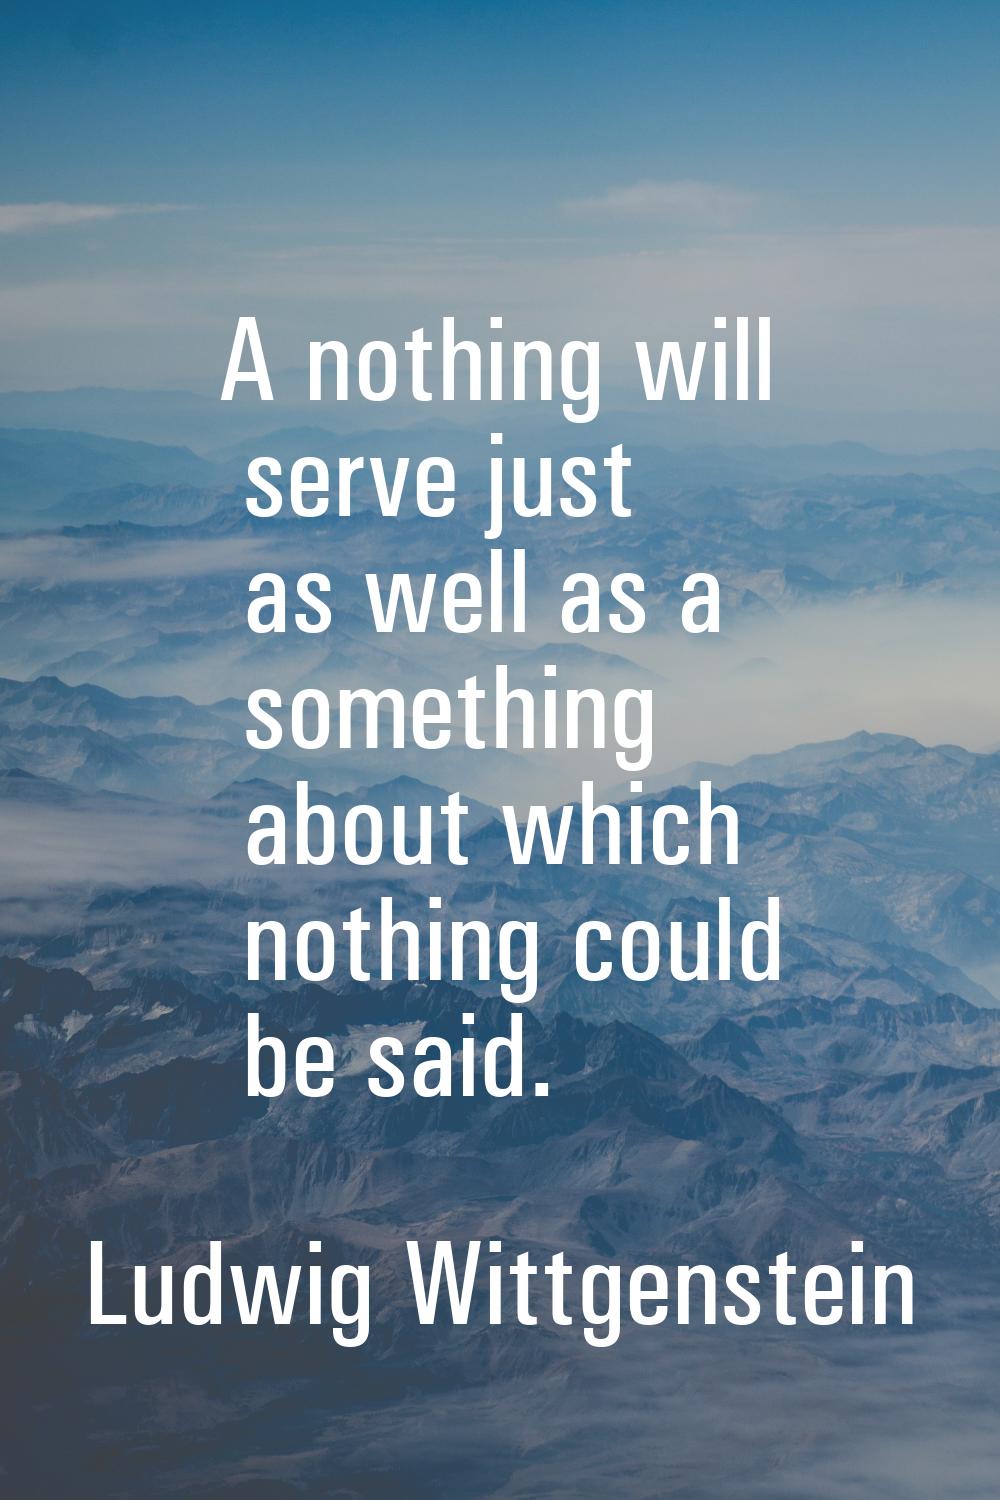 A nothing will serve just as well as a something about which nothing could be said.